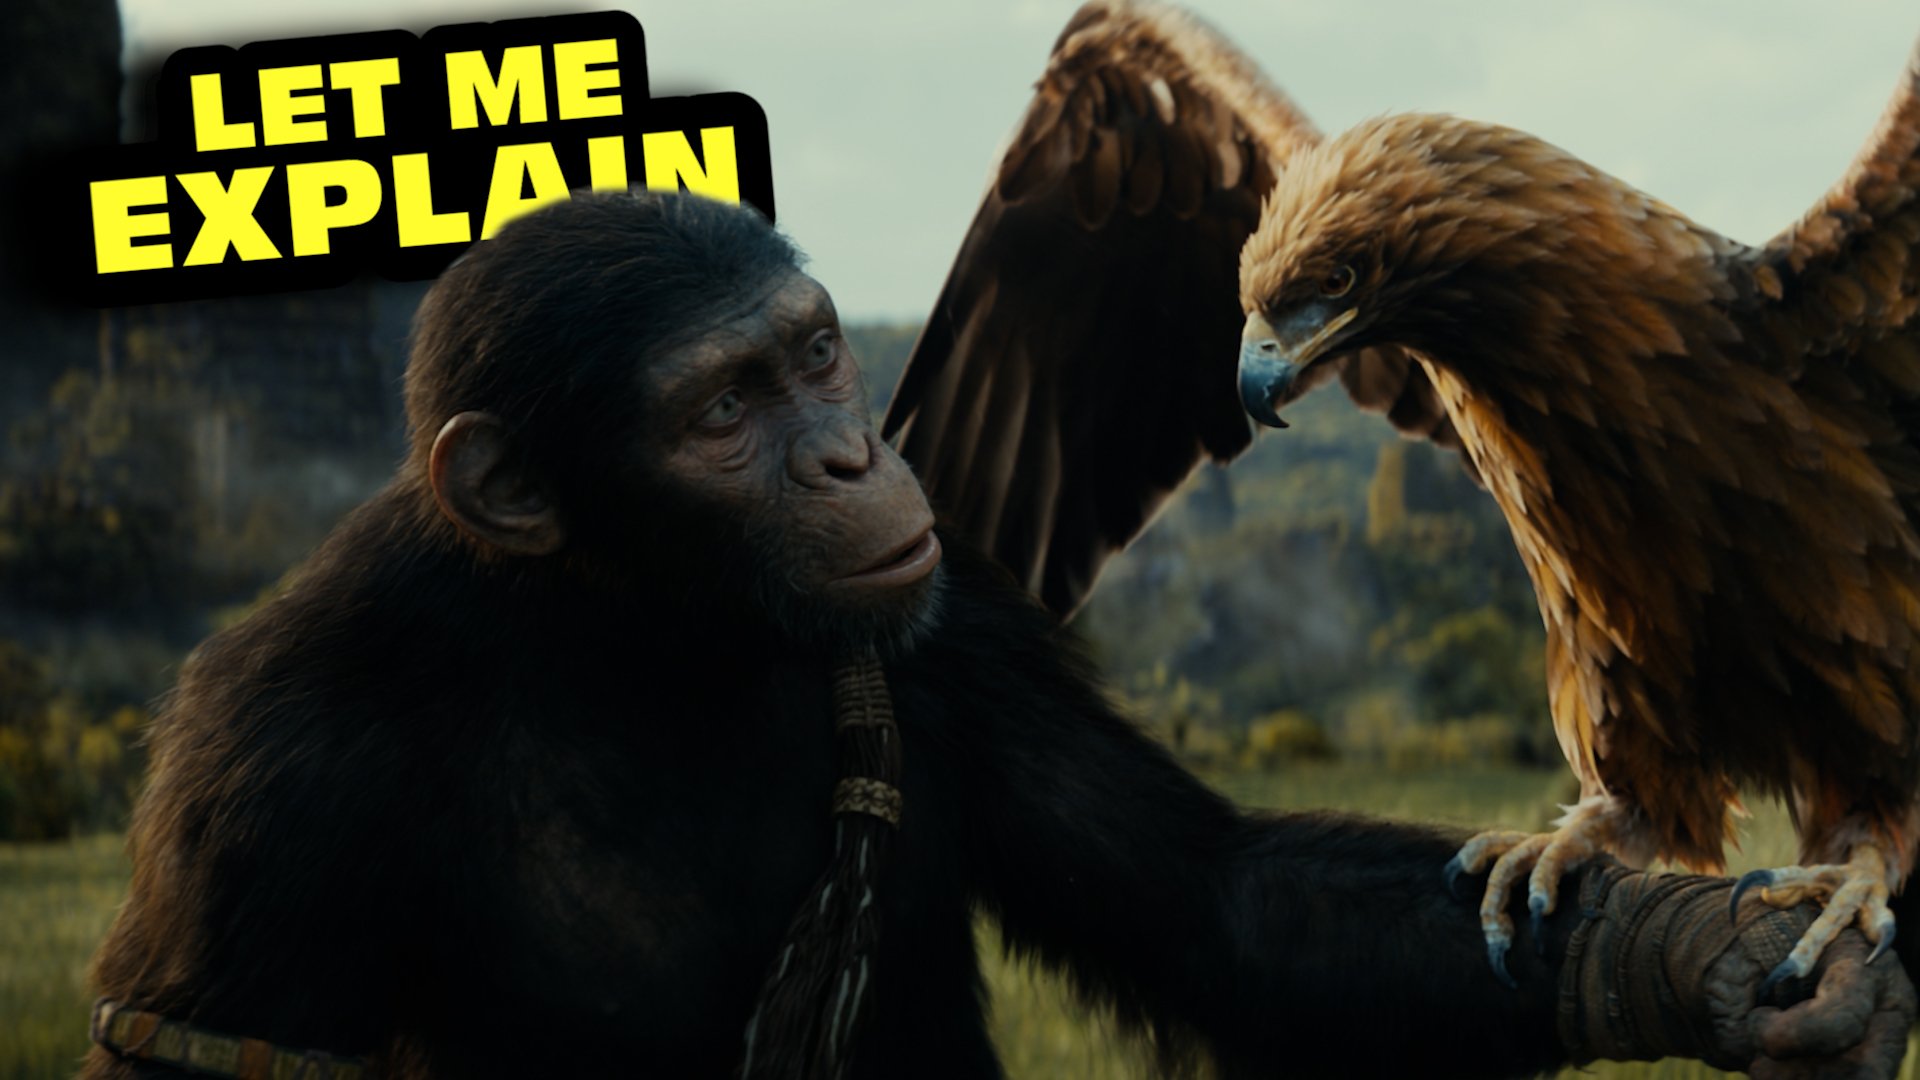 Kingdom of the Planets of the Apes